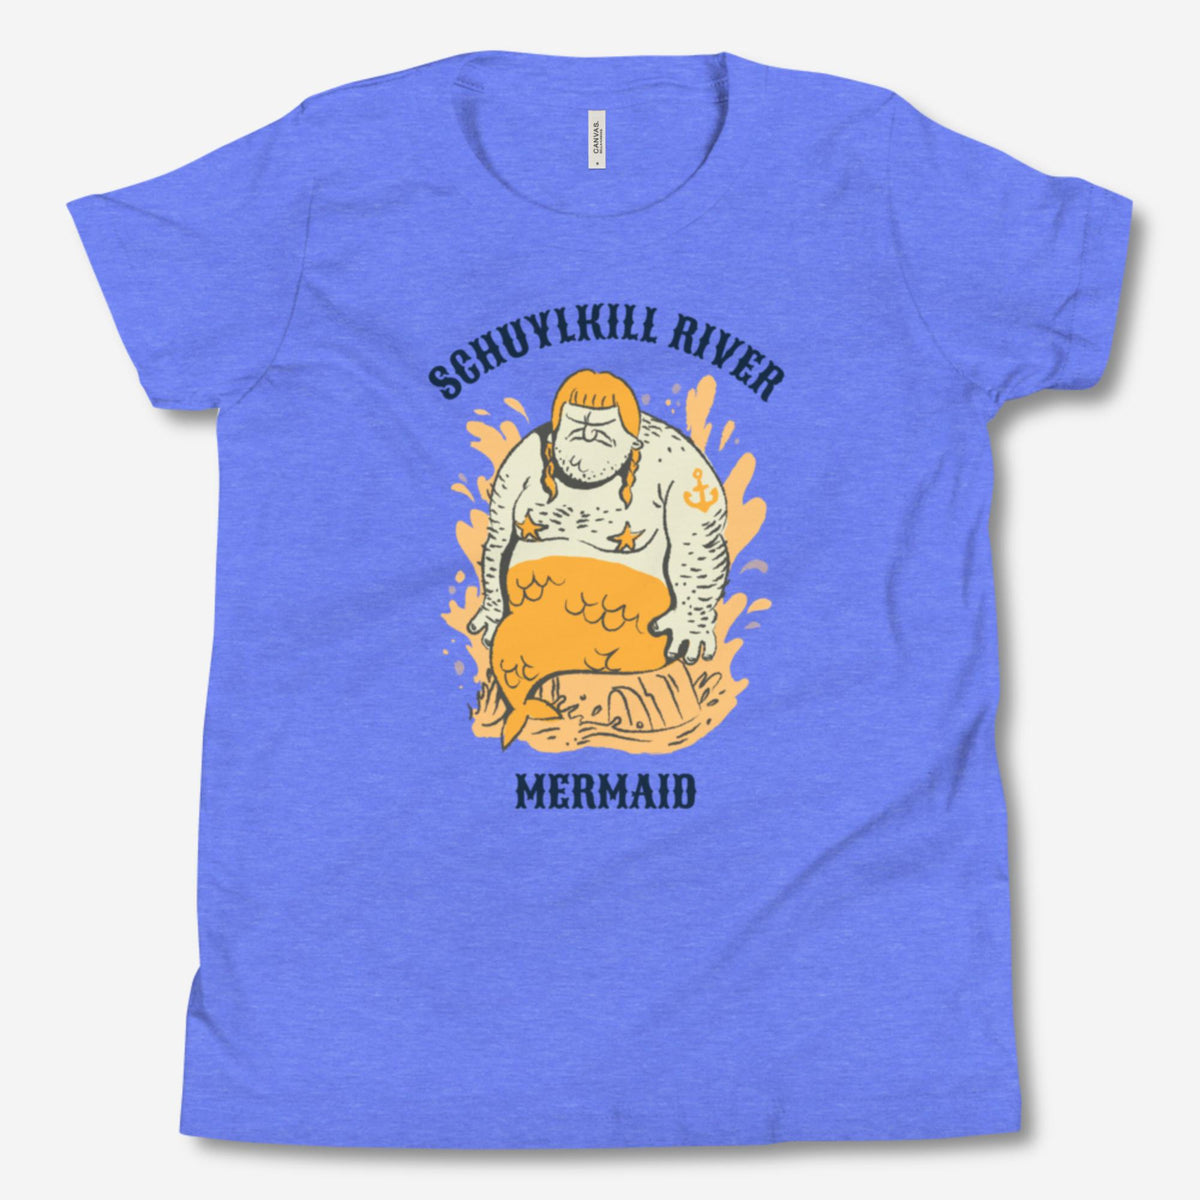 &quot;Schuylkill River Mermaid&quot; Youth Tee